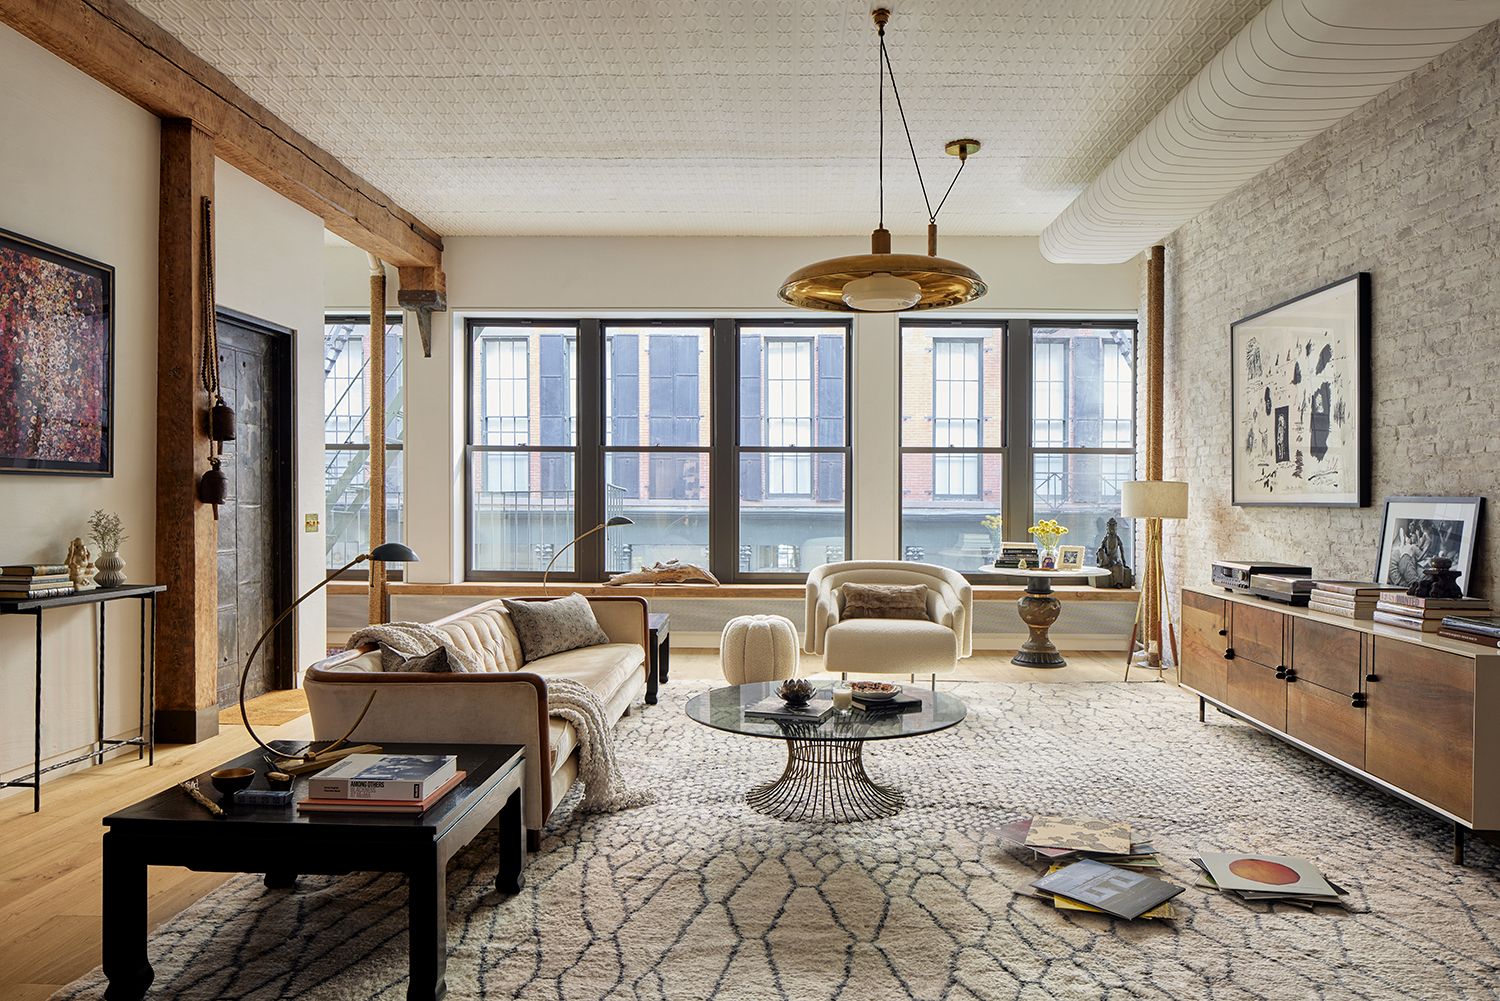 This Hip, Huge Artist Loft in Soho Will Not Come Cheap